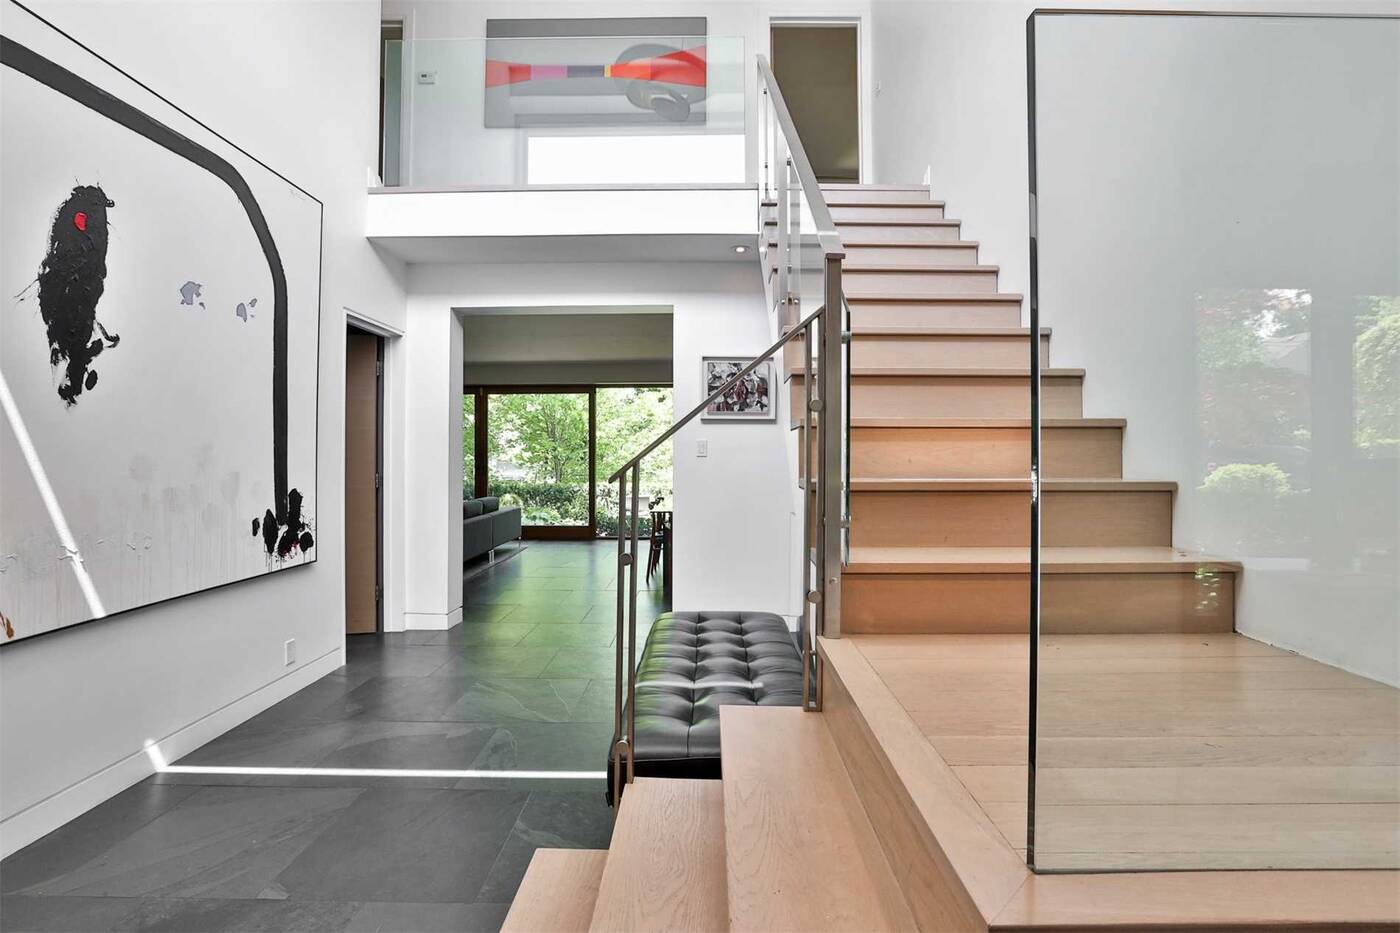 This contemporary  million Toronto dwelling was designed by the well-known architect Harry B. Kohl